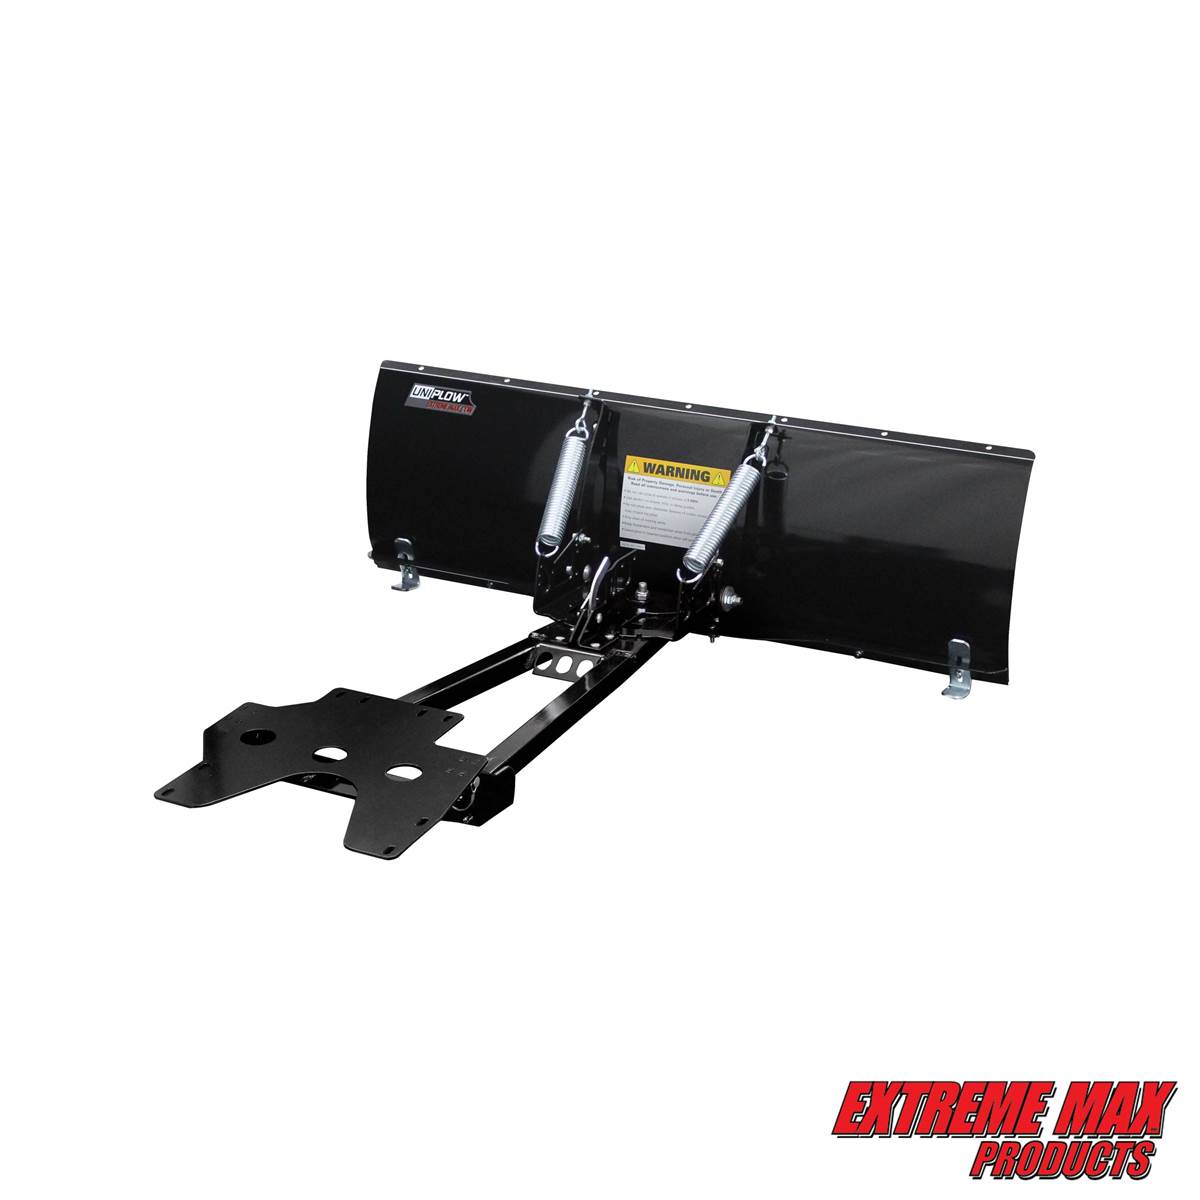 Extreme Max 5500.5112 Heavy-Duty UniPlow One-Box ATV Plow System with  Can-Am Outlander Mount - 60